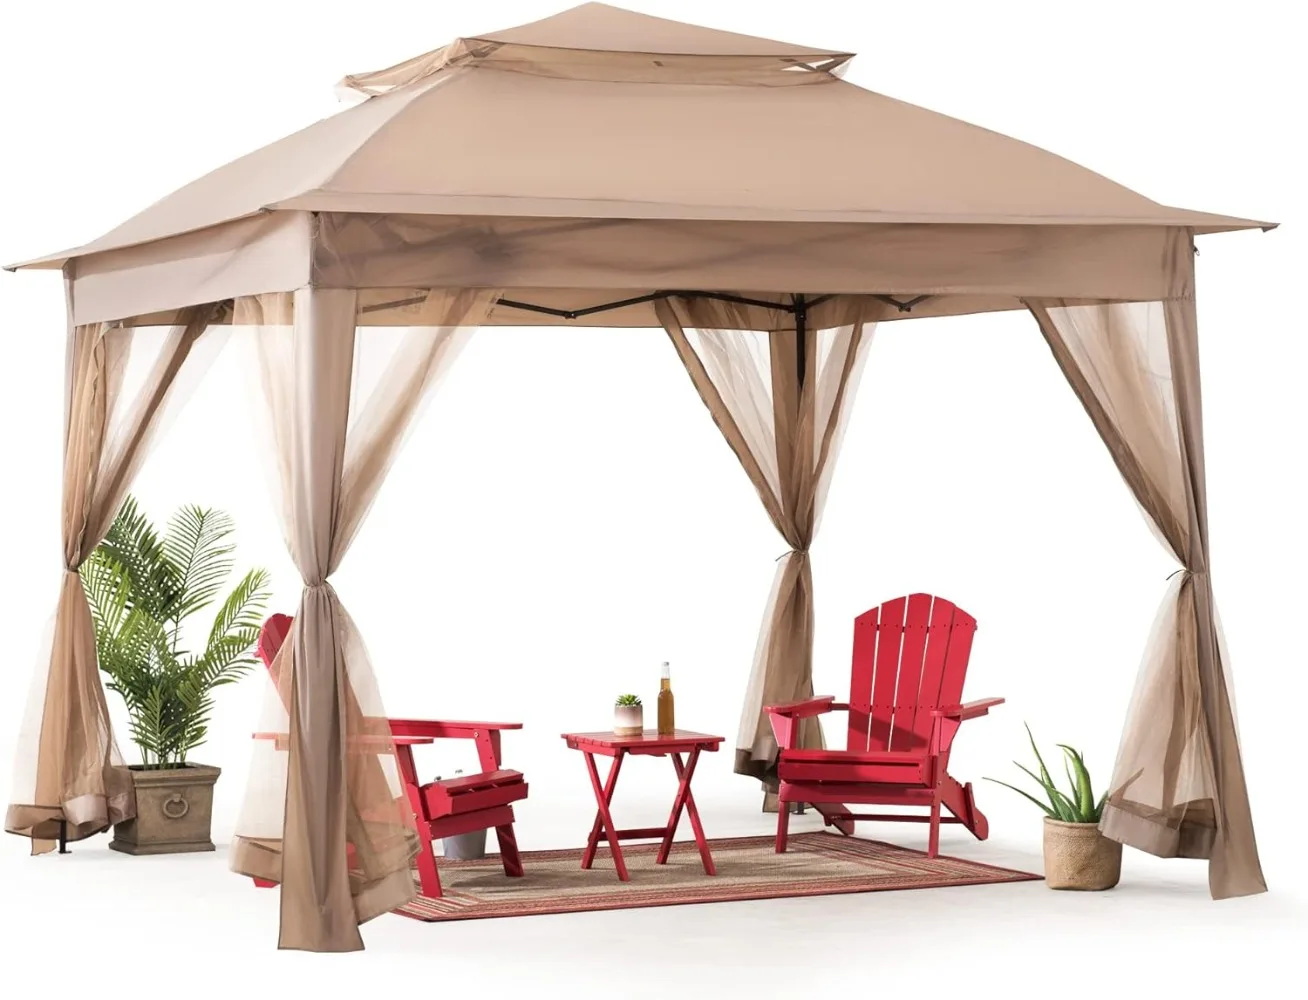 

11x11 Ft. Pop-Up Instant Gazebo, Outdoor Portable Steel Frame 2-Tier Top Canopy/Tent with Netting and Carry Bag, Khaki